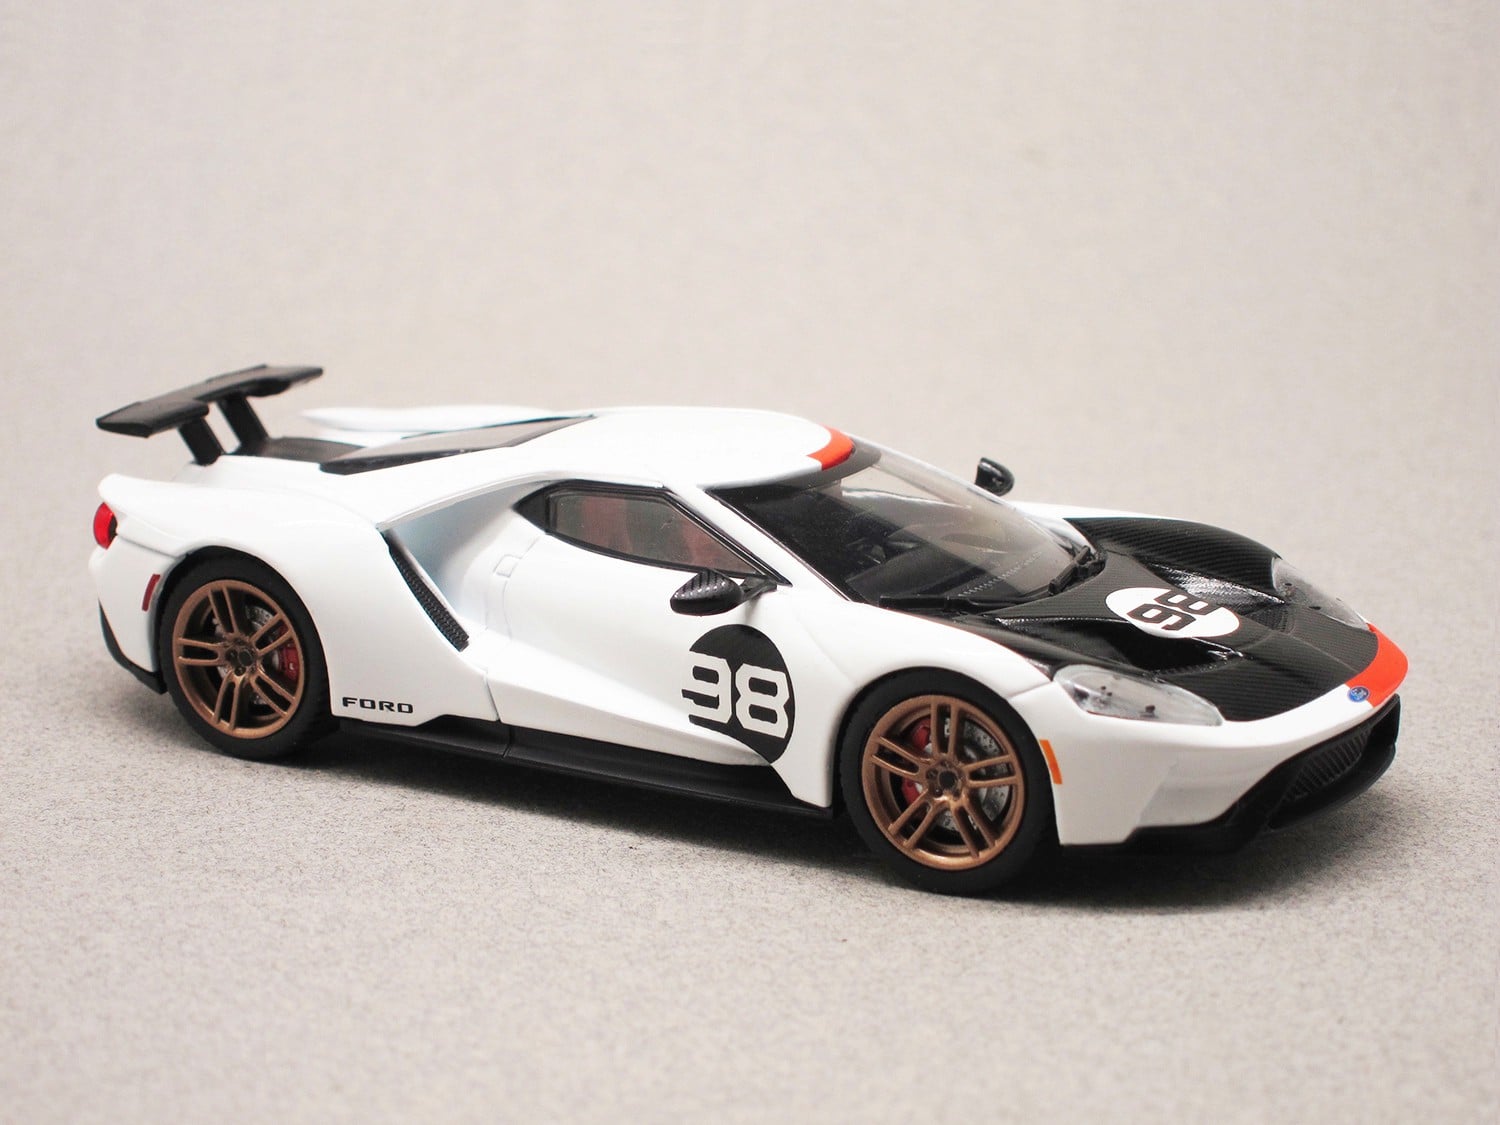 Ford GT Heritage Edition n°98 (Greenlight) 1/43e